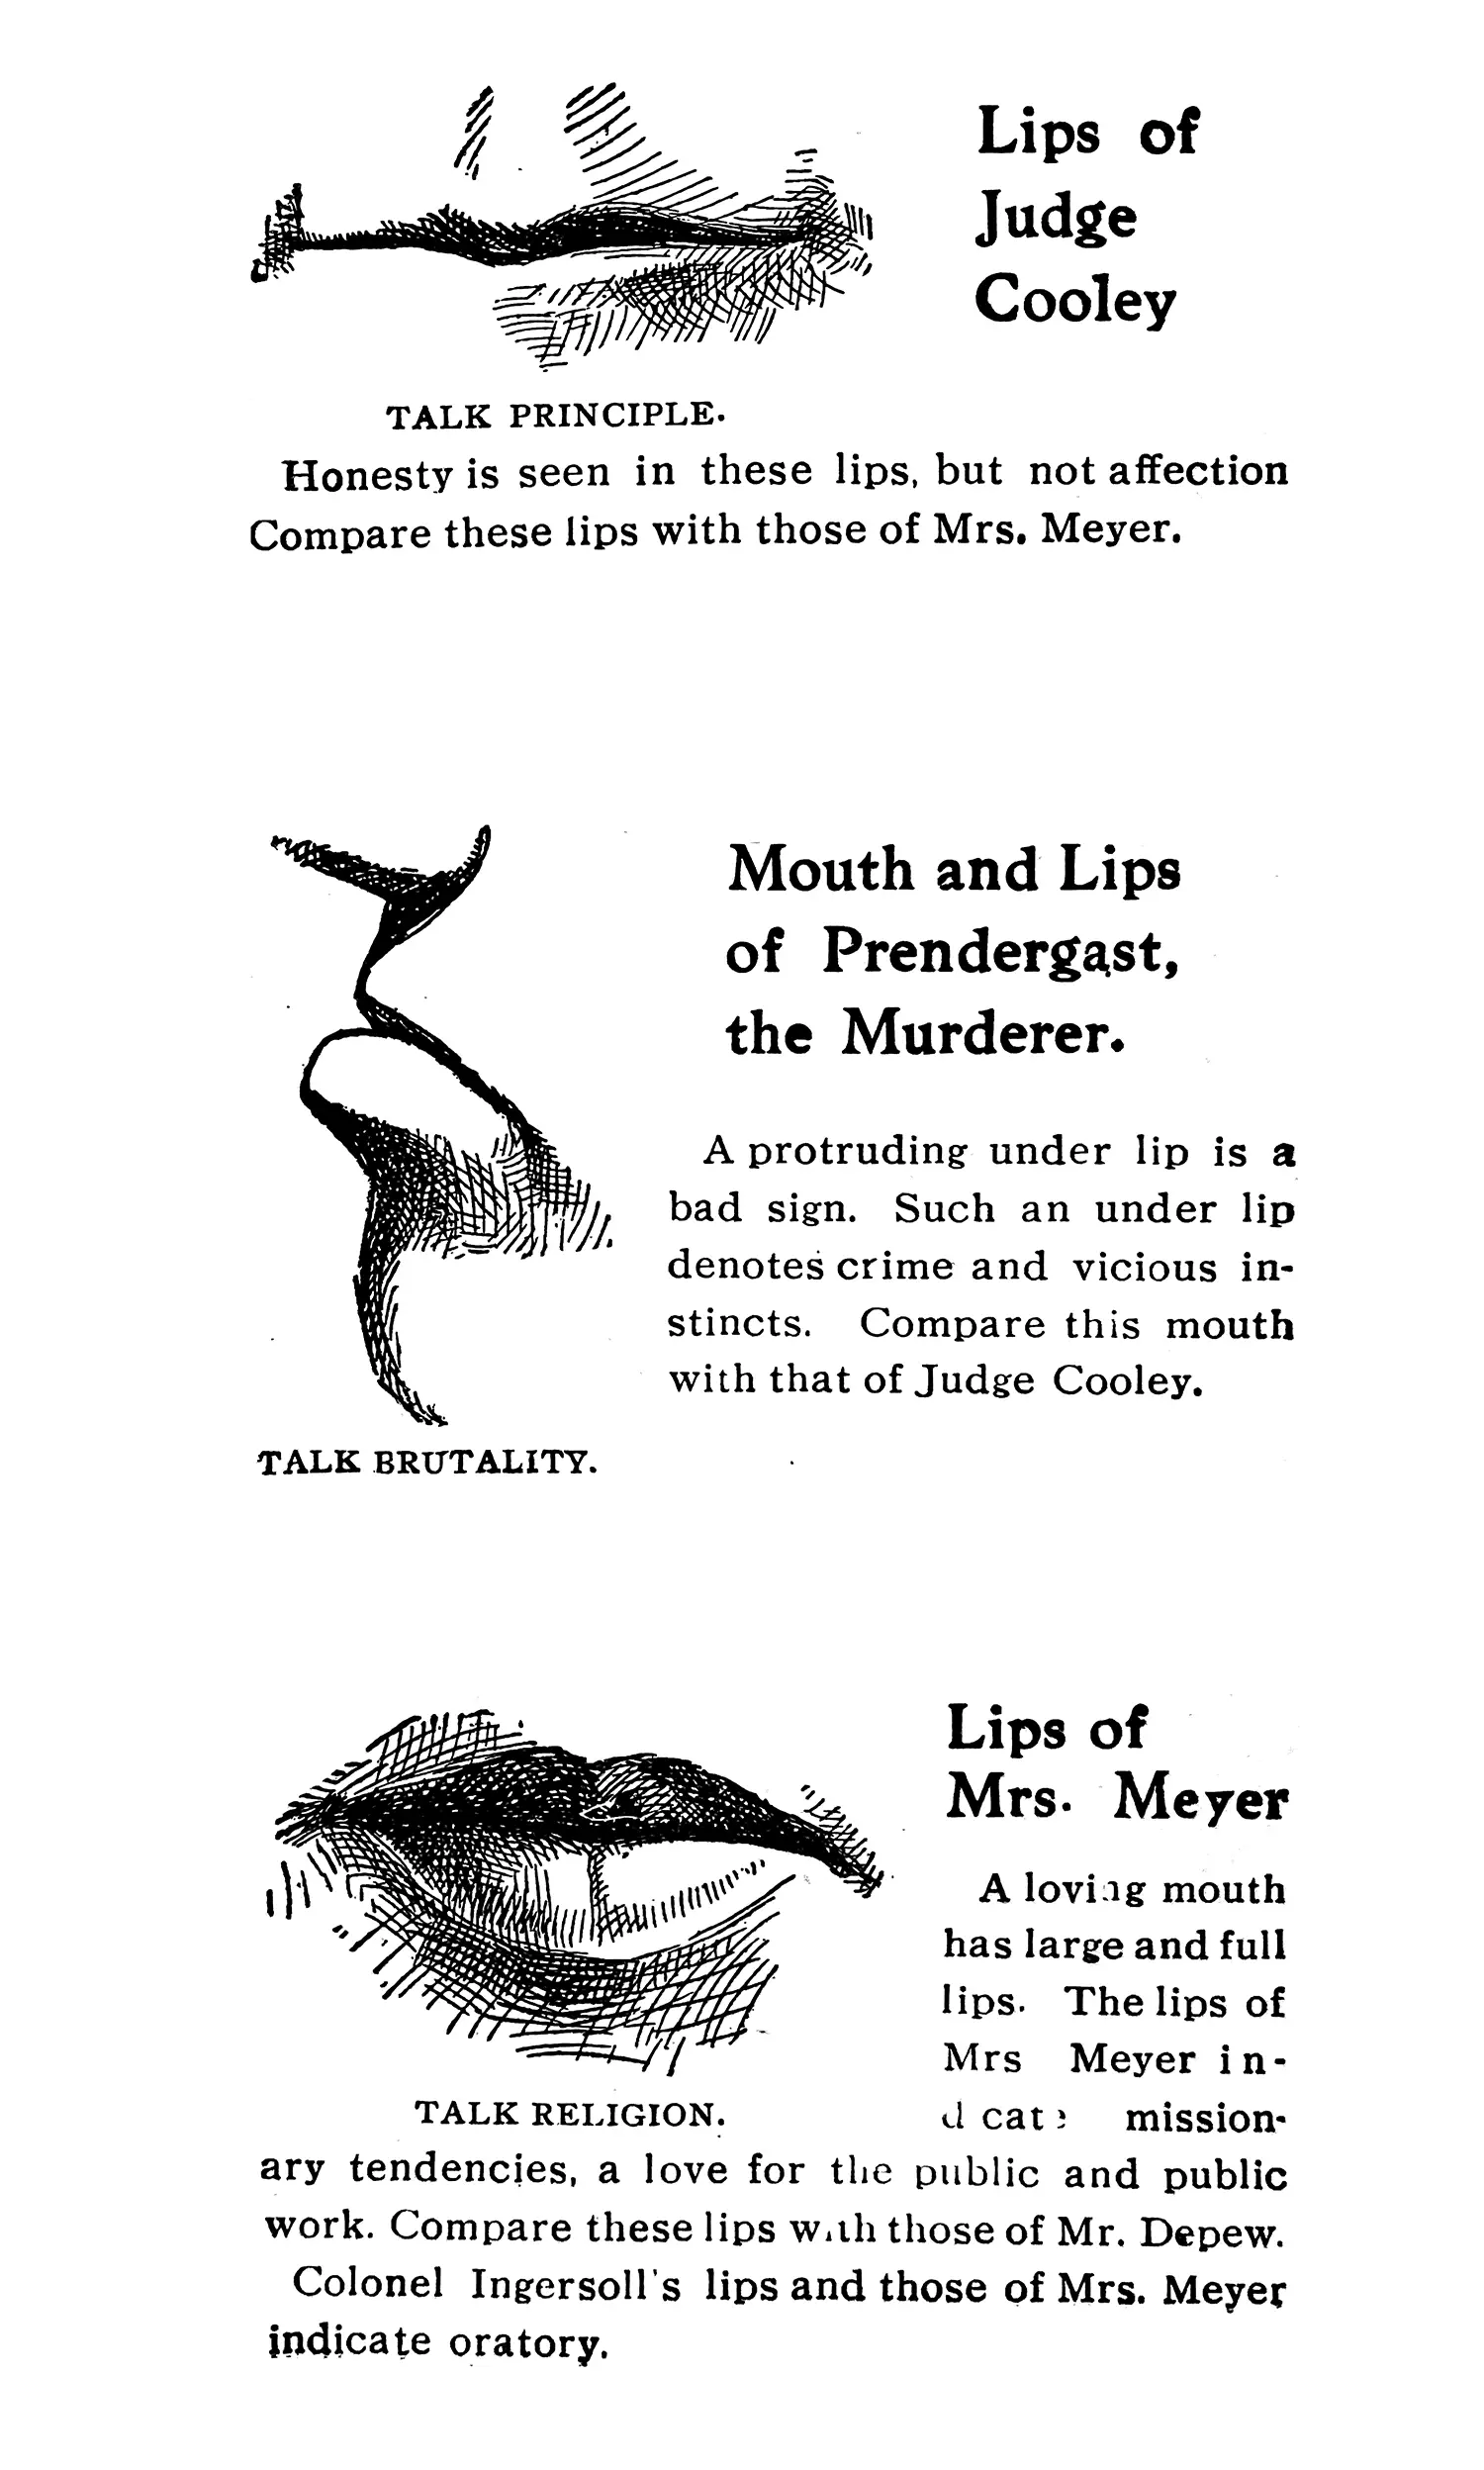 Clipping from an old publication containing drawings of 3 kinds of lips. Thin, neutral lips described as “Lips of Judge Cooley” beneath which it says “honesty is seen in these lips, but not affection.” Followed by “Mouth and Lips of Prendergast, the Murderer,” “A protruding under lip is a bad sign. Such an under lip denotes crime and vicious instincts.” Beneath which are the “Lips of Mrs. Meyer,” “A loving mouth has large and full lips. The lips of Mrs. Meyer indicate missionary tendencies, a love for the public and public work.”